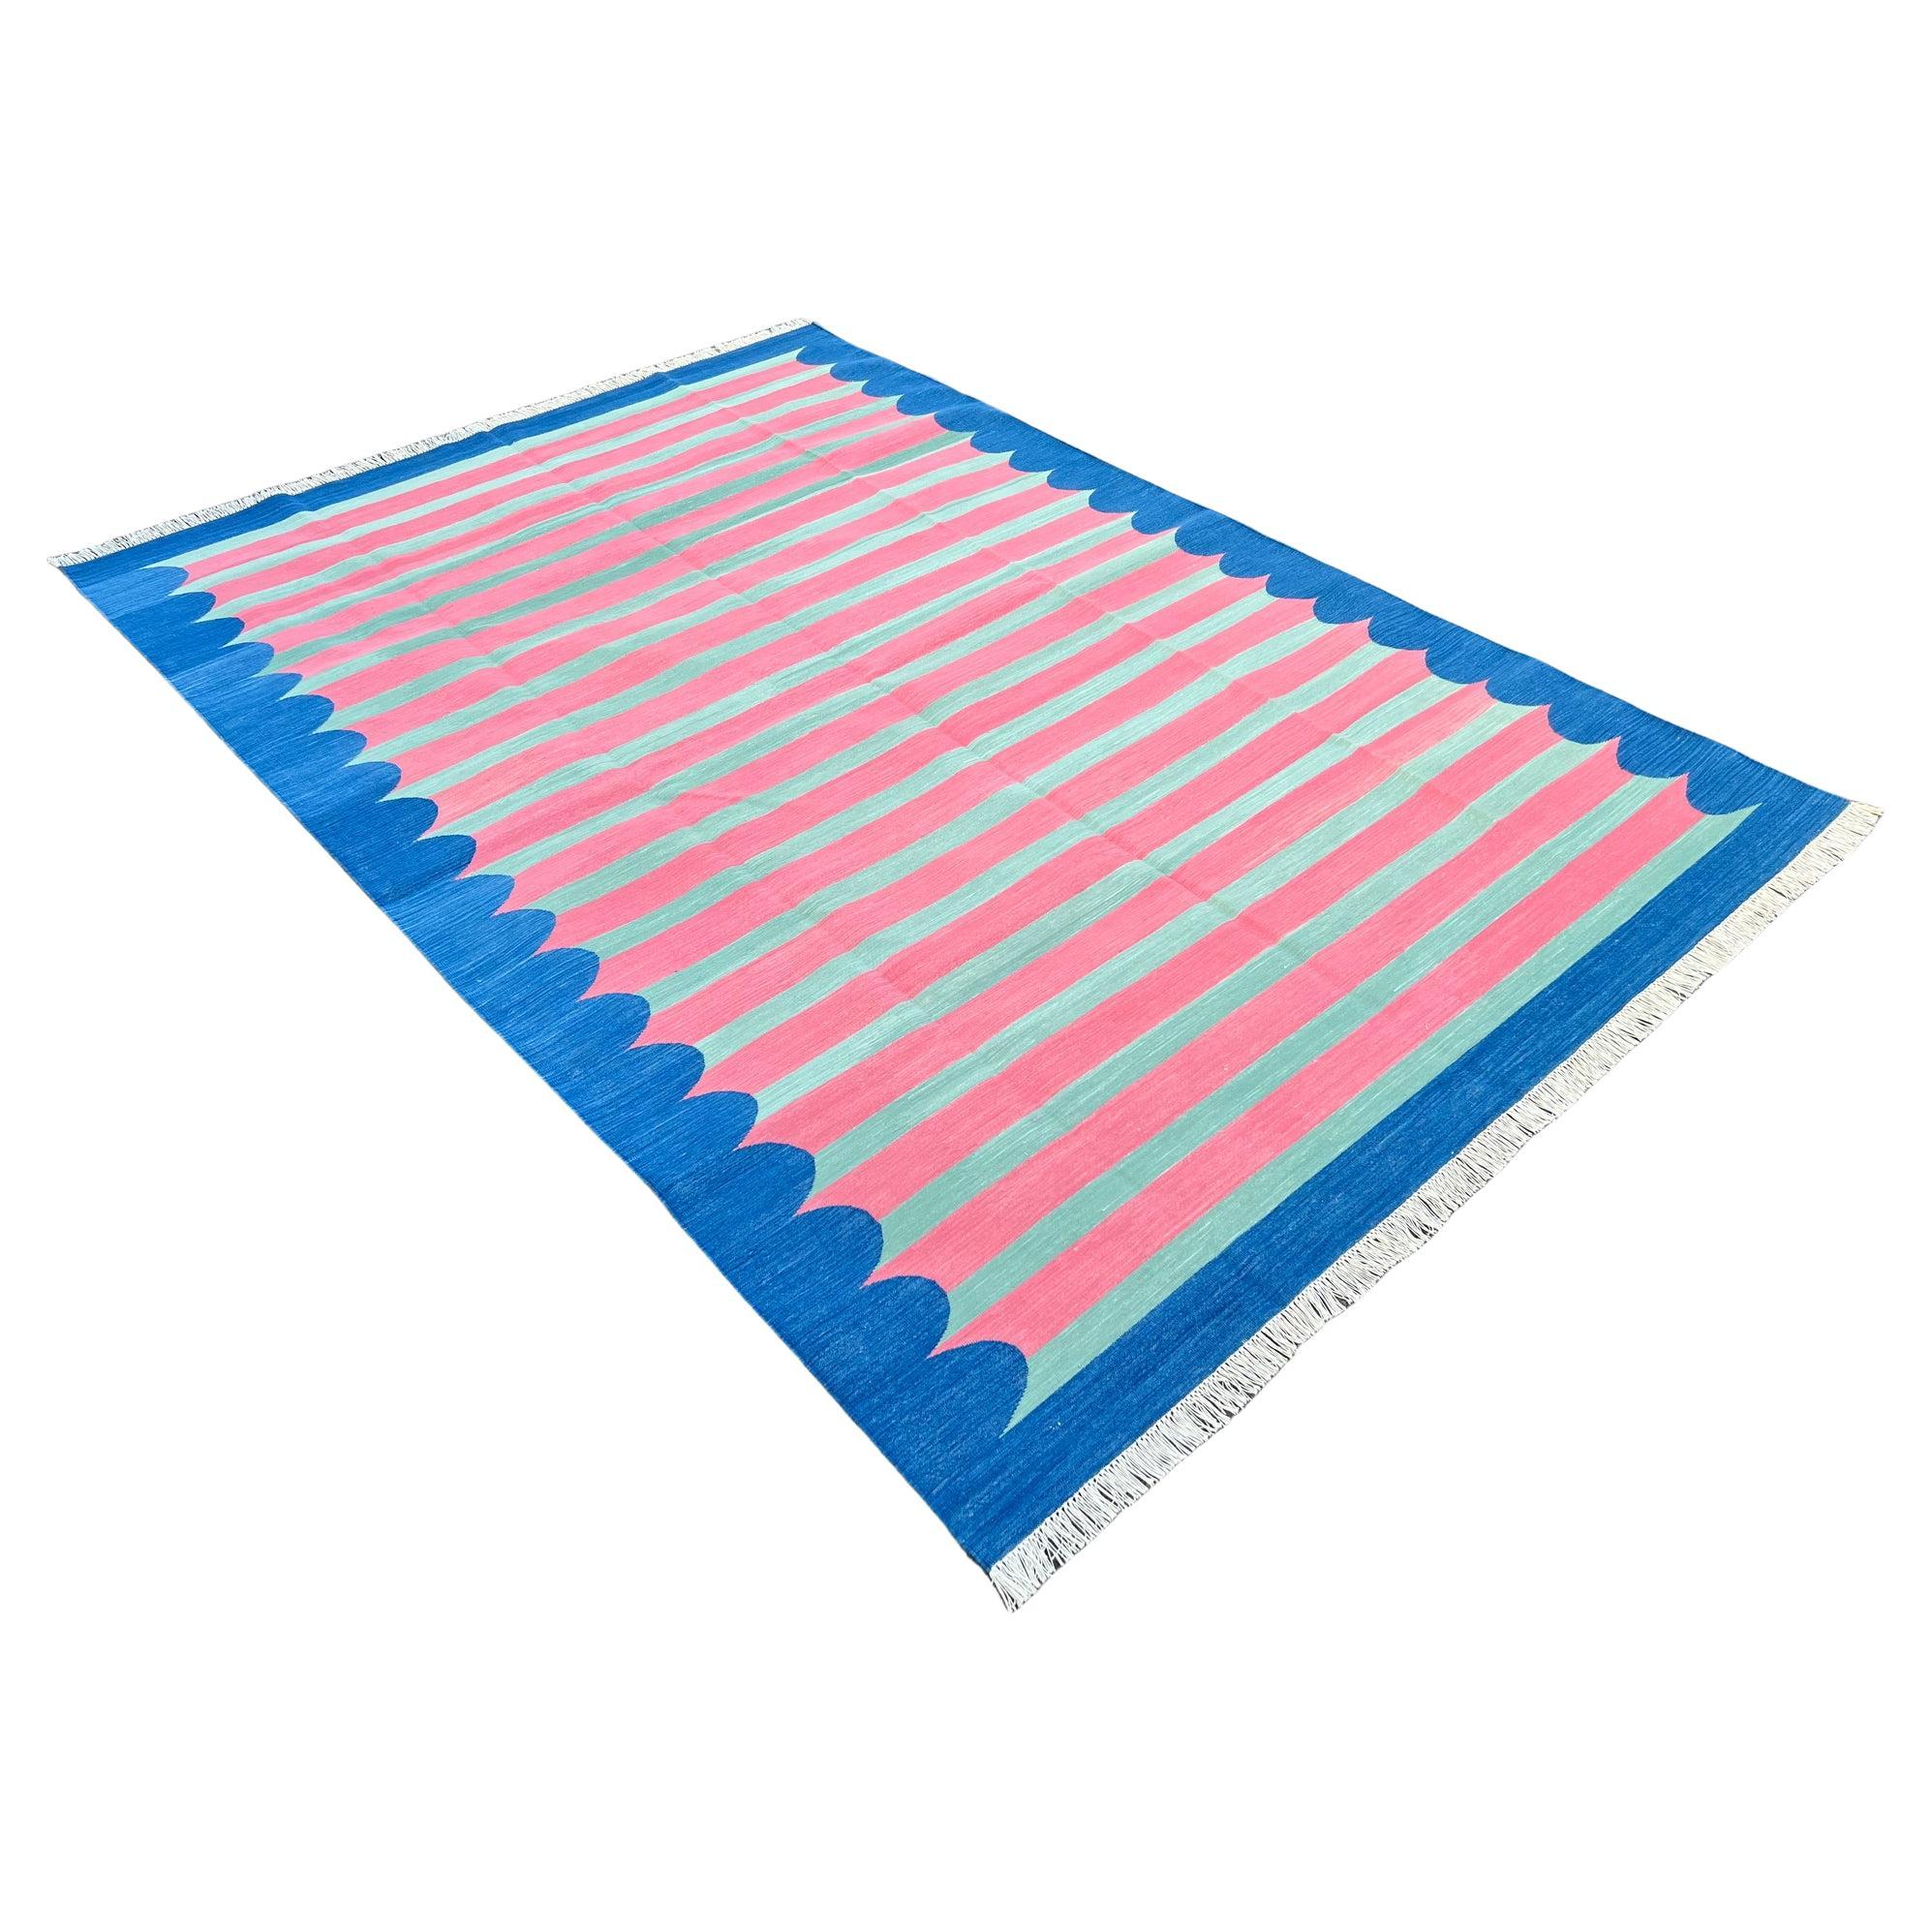 Handmade Cotton Area Flat Weave Rug, Pink And Blue Scalloped Striped Dhurrie Rug